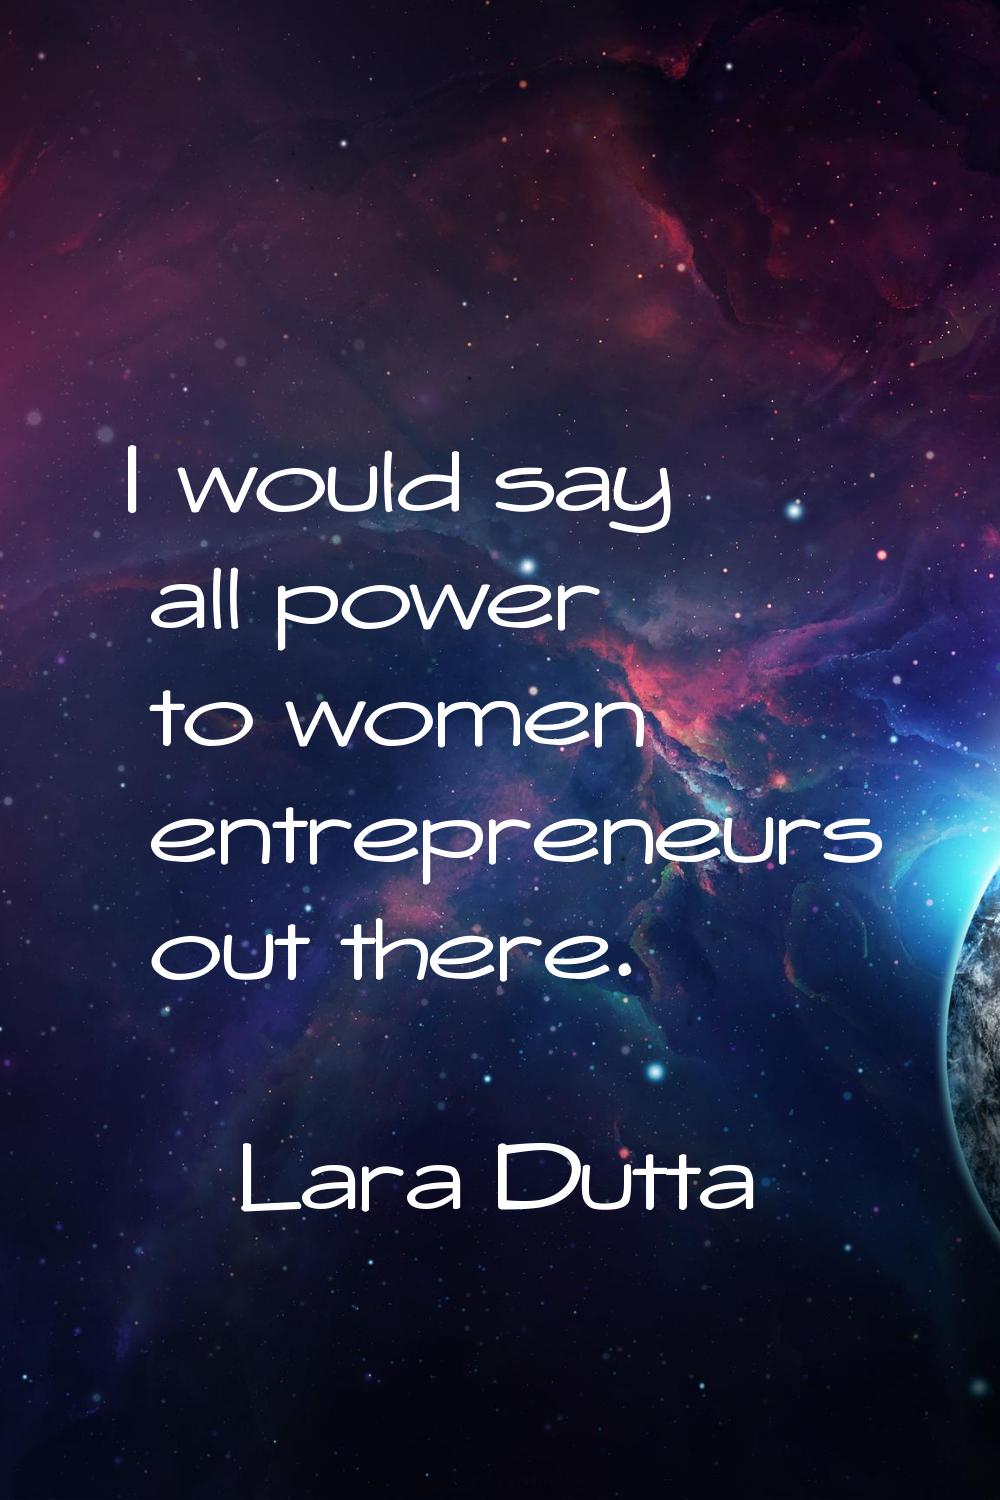 I would say all power to women entrepreneurs out there.